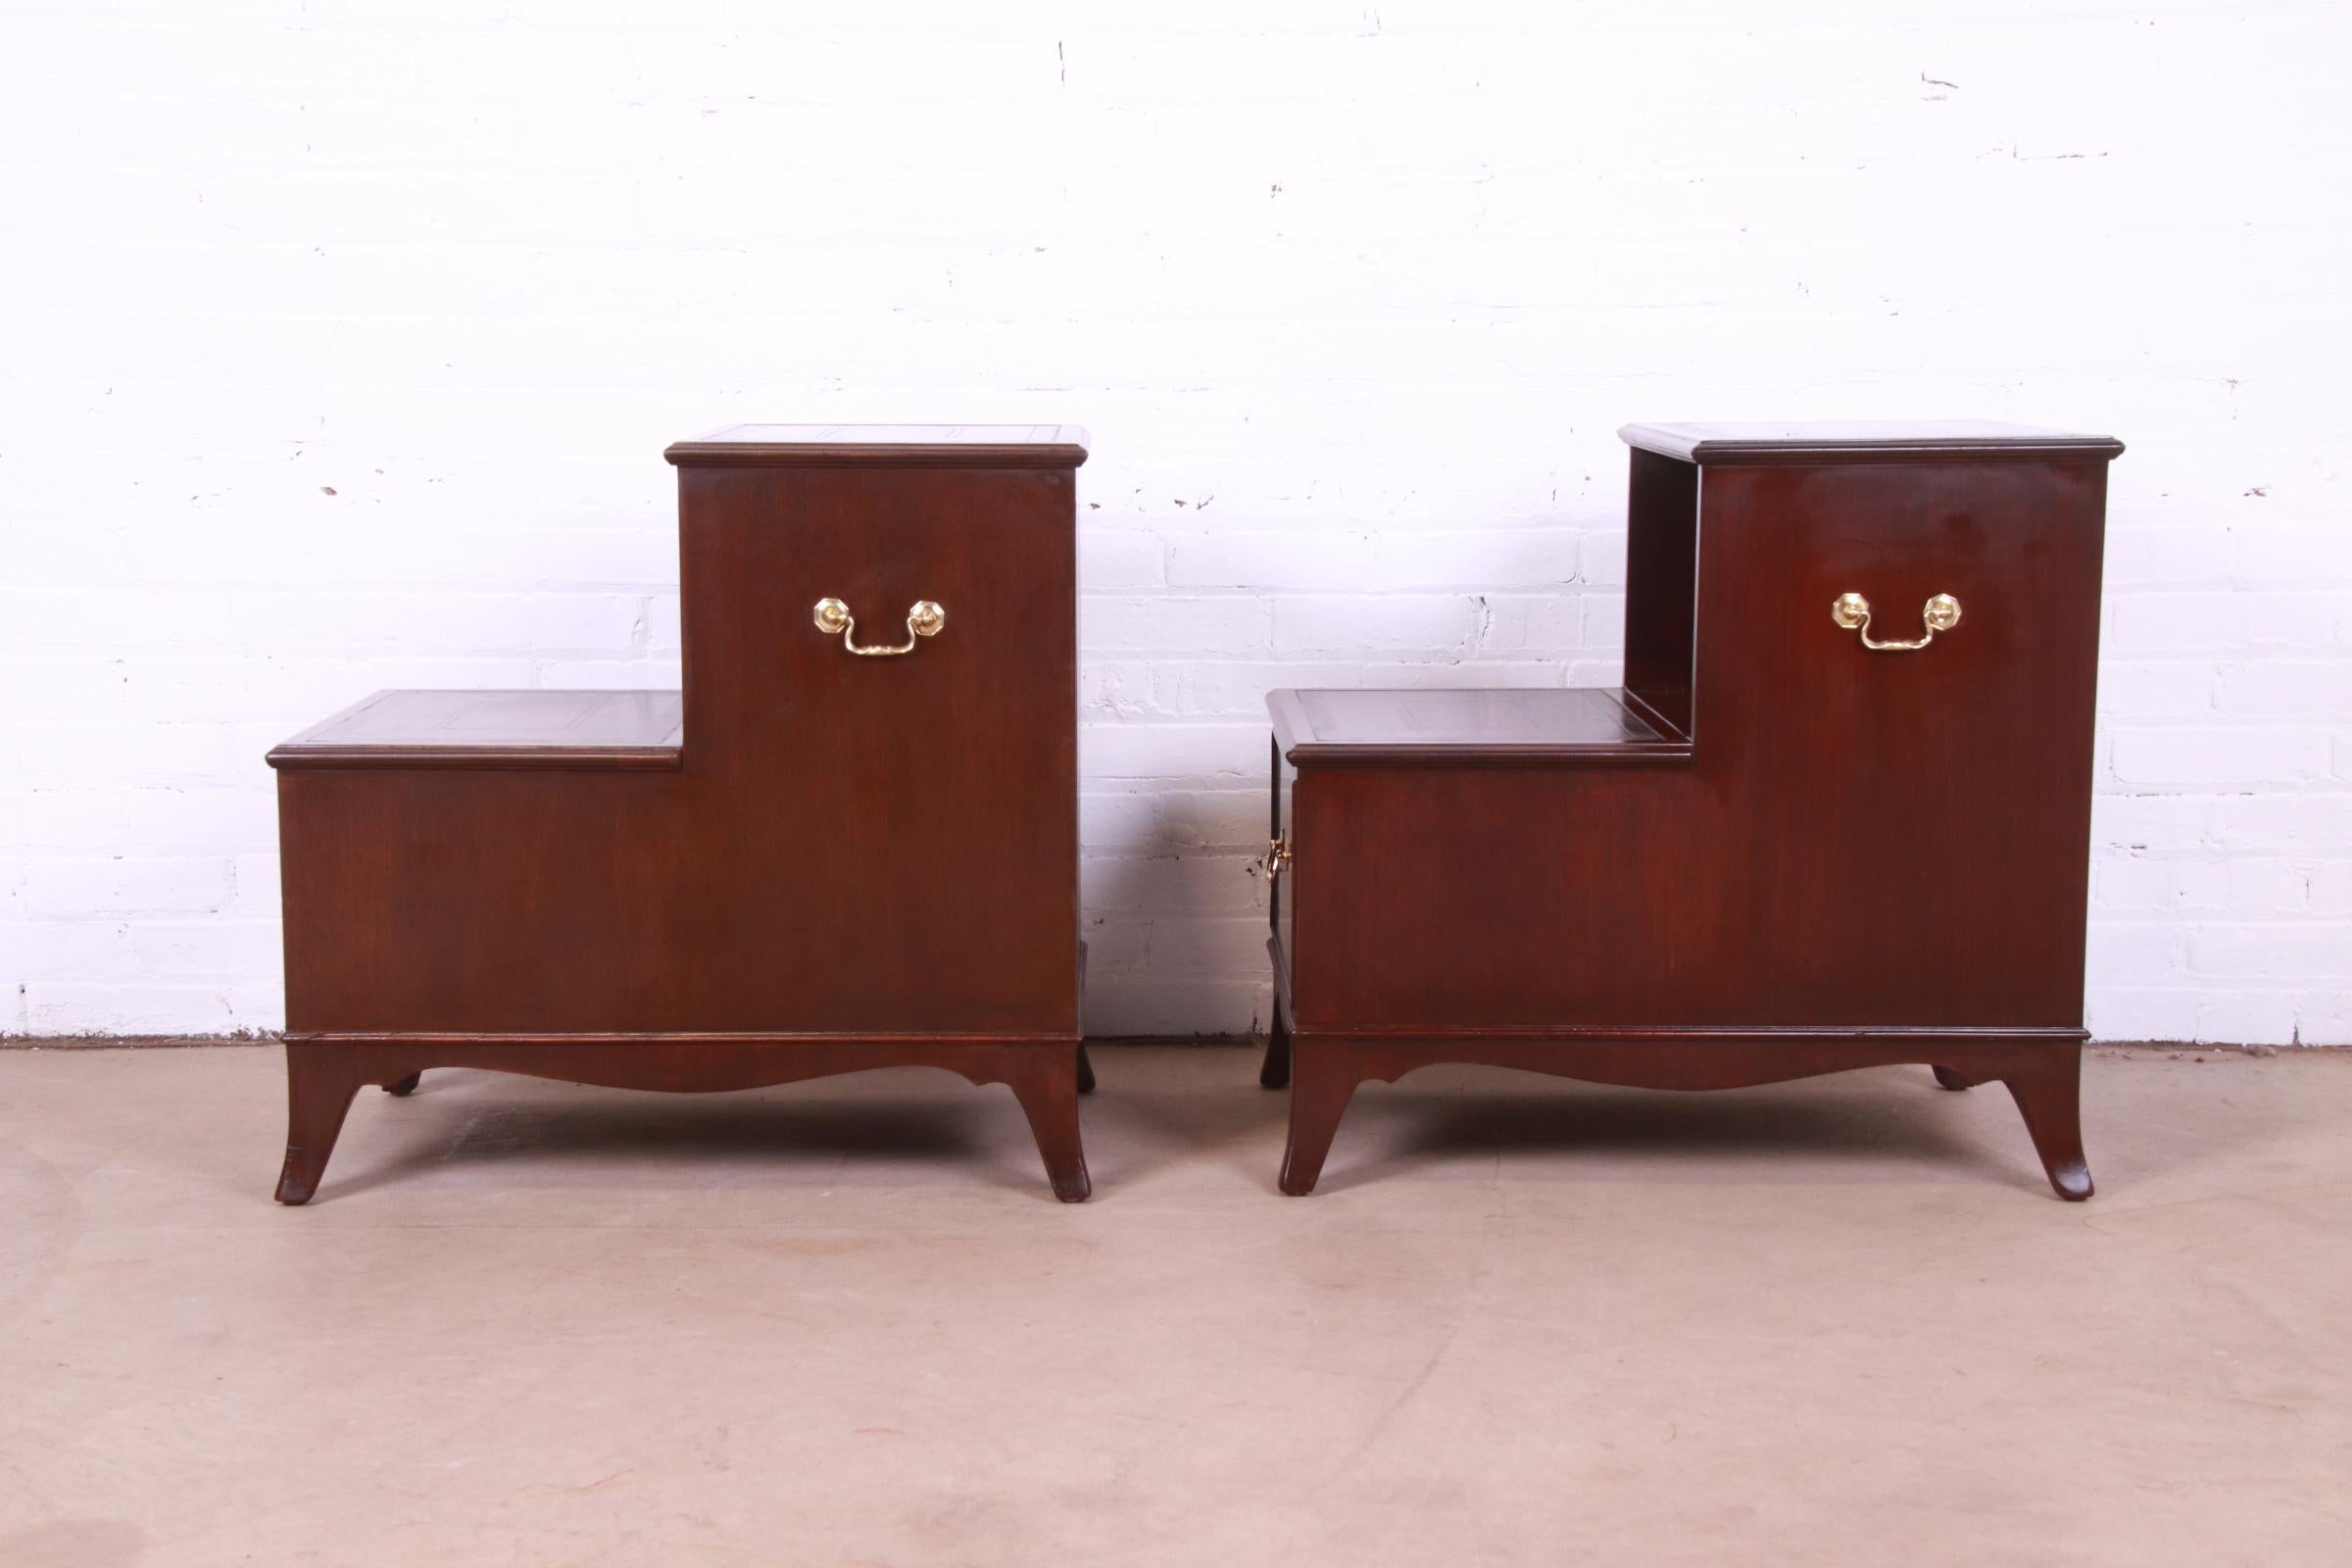 Heritage Georgian Mahogany Leather Top Step End Tables or Nightstands, Pair For Sale 5